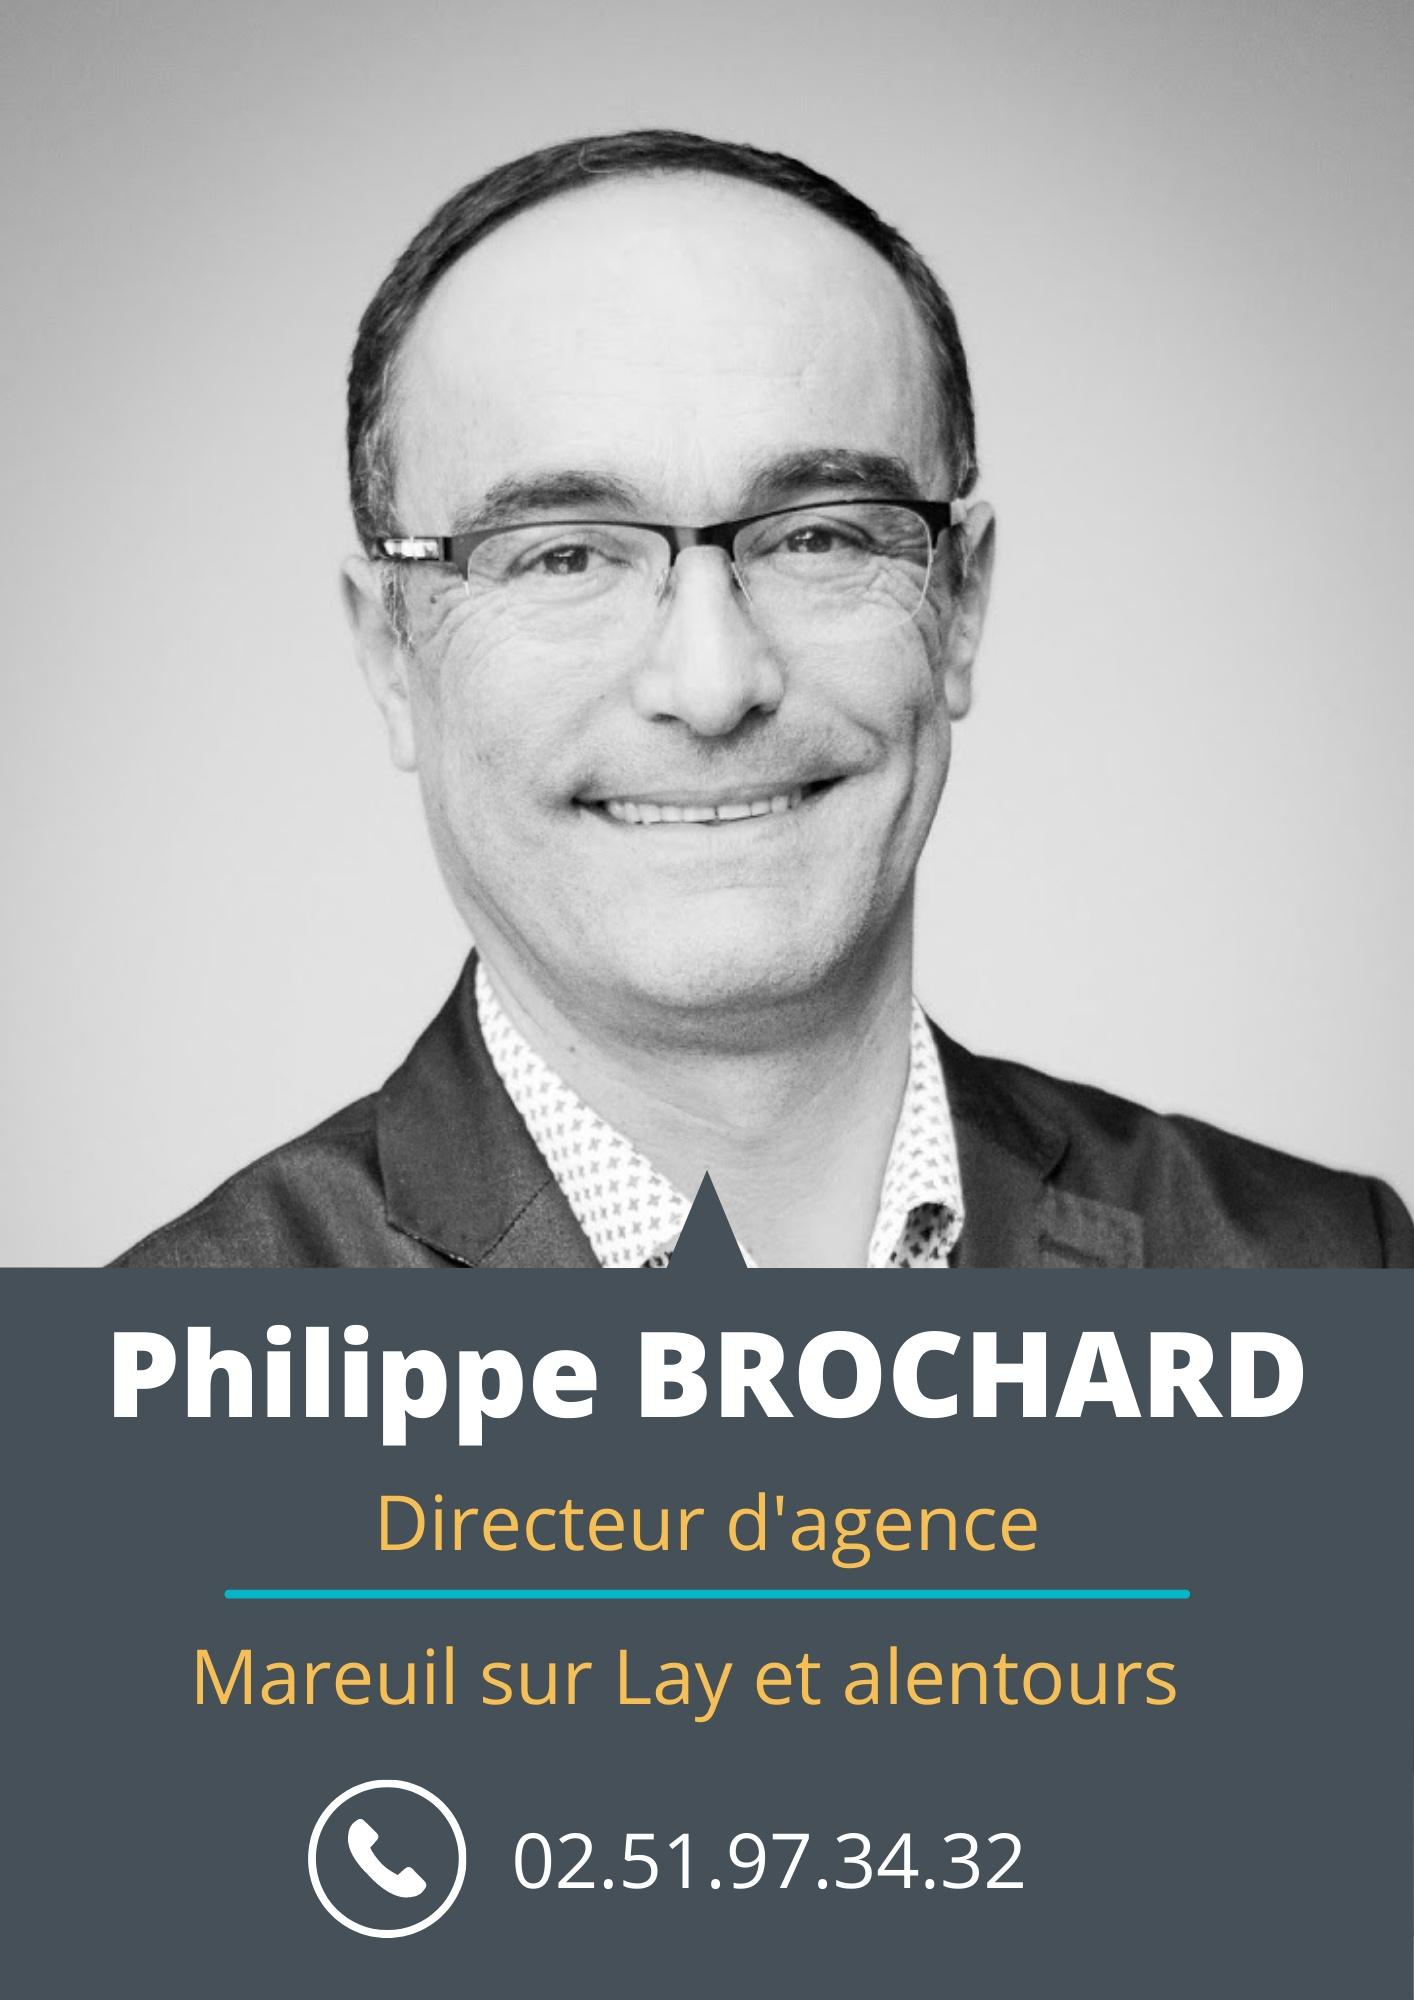 Philippe Brochard Immobilier - Agence Immobilière Mareuil Sur Lay Dissais  Mareuil Sur Lay Dissais